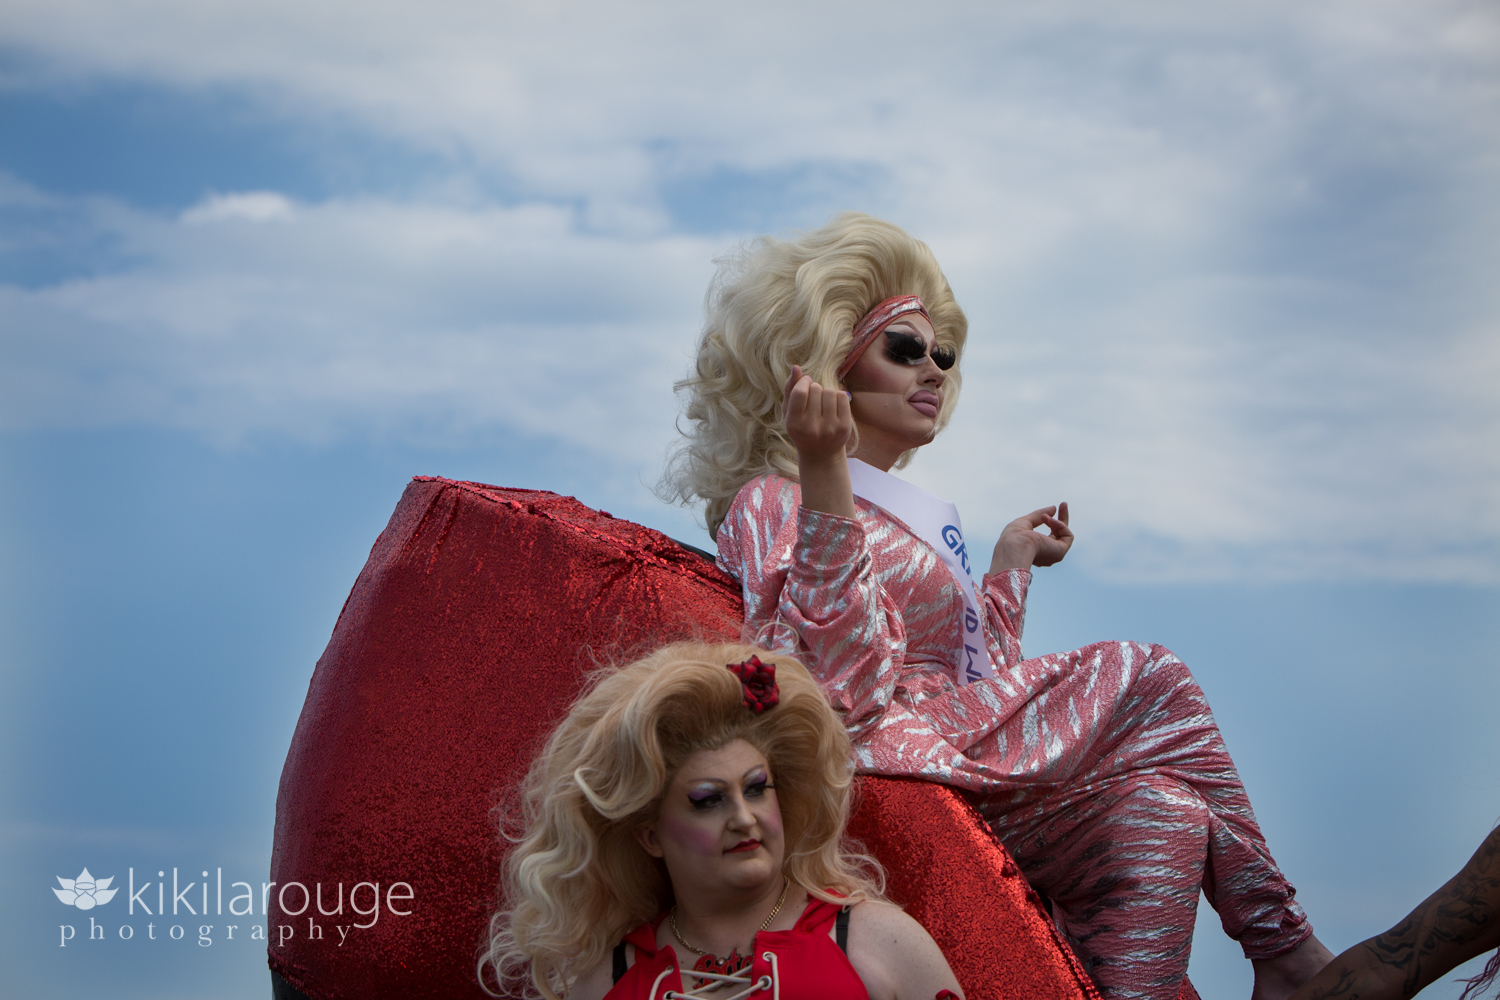 Trixie Mattel sitting on large red show on carnival float PTown